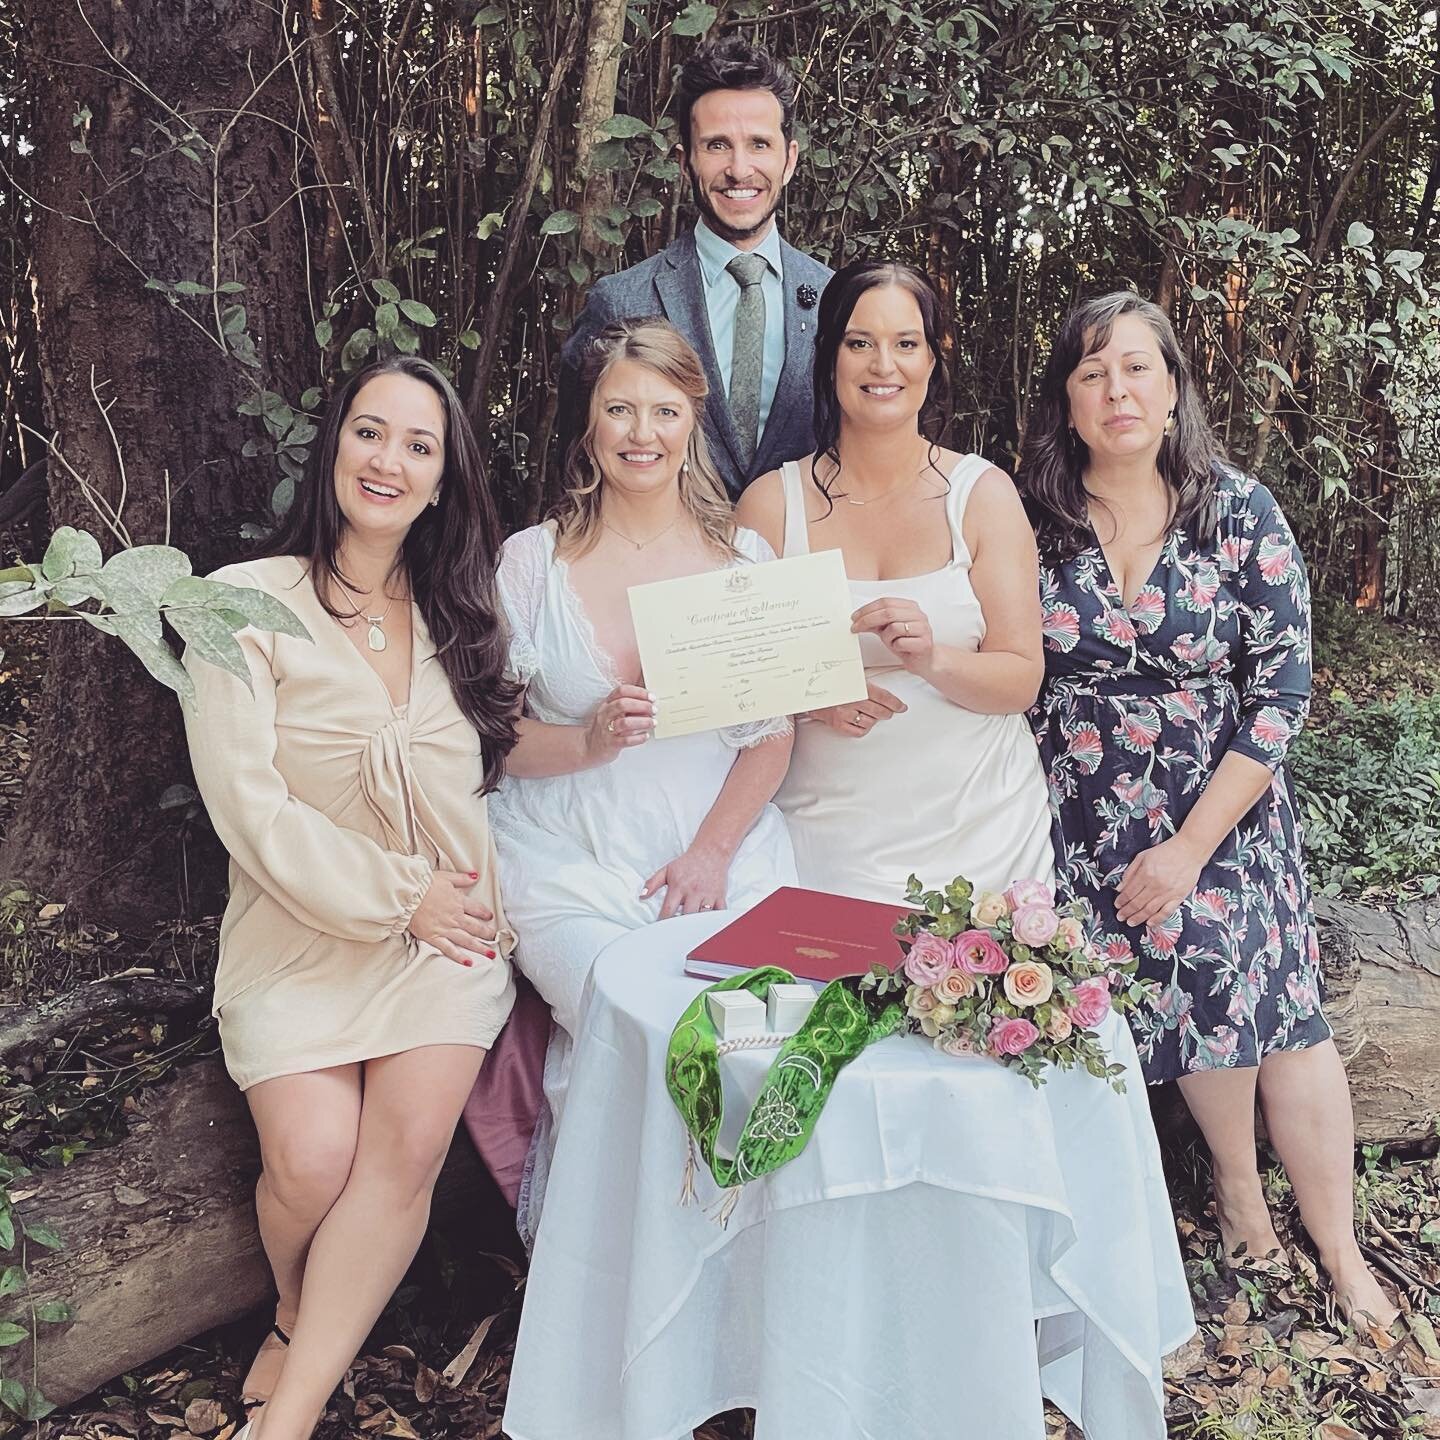 Congrats Elise &amp; Tati 🥳 What a beautiful day it was and stunning location. Such a special ceremony 😍 So much love to you xx 
.
#weddingday #loveislove #congratulations